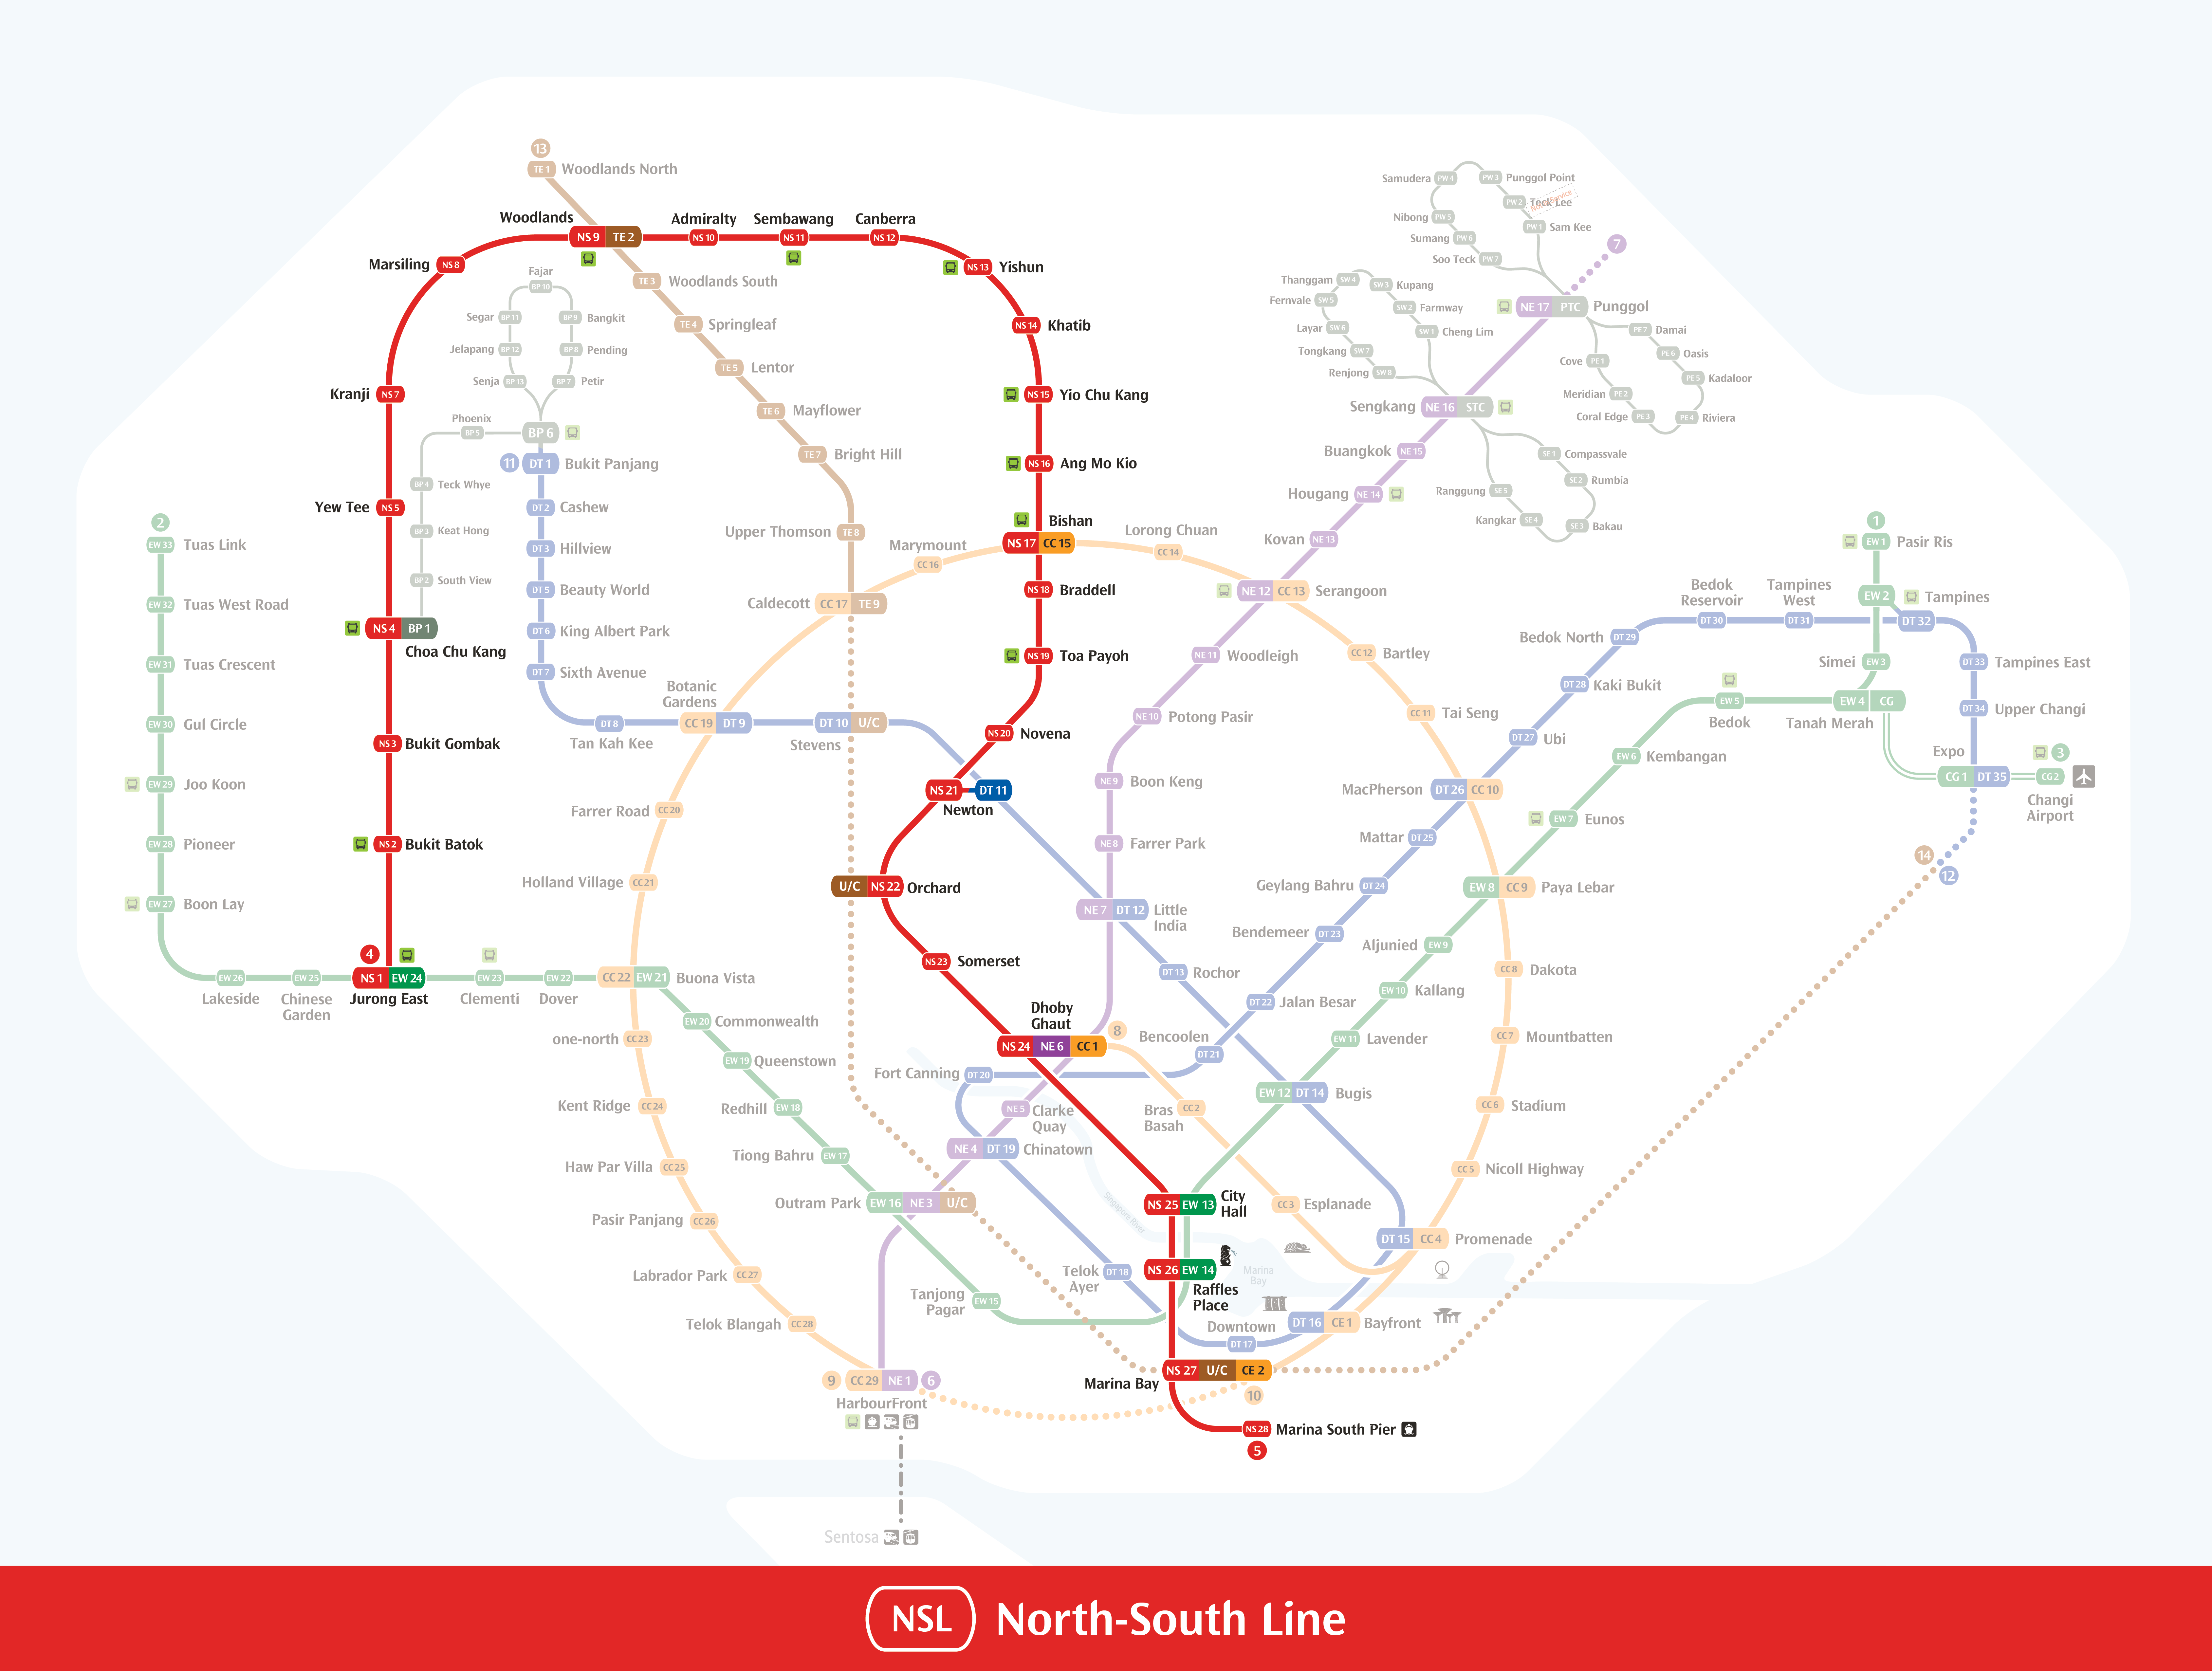 The North-South Line of Singapores MRT